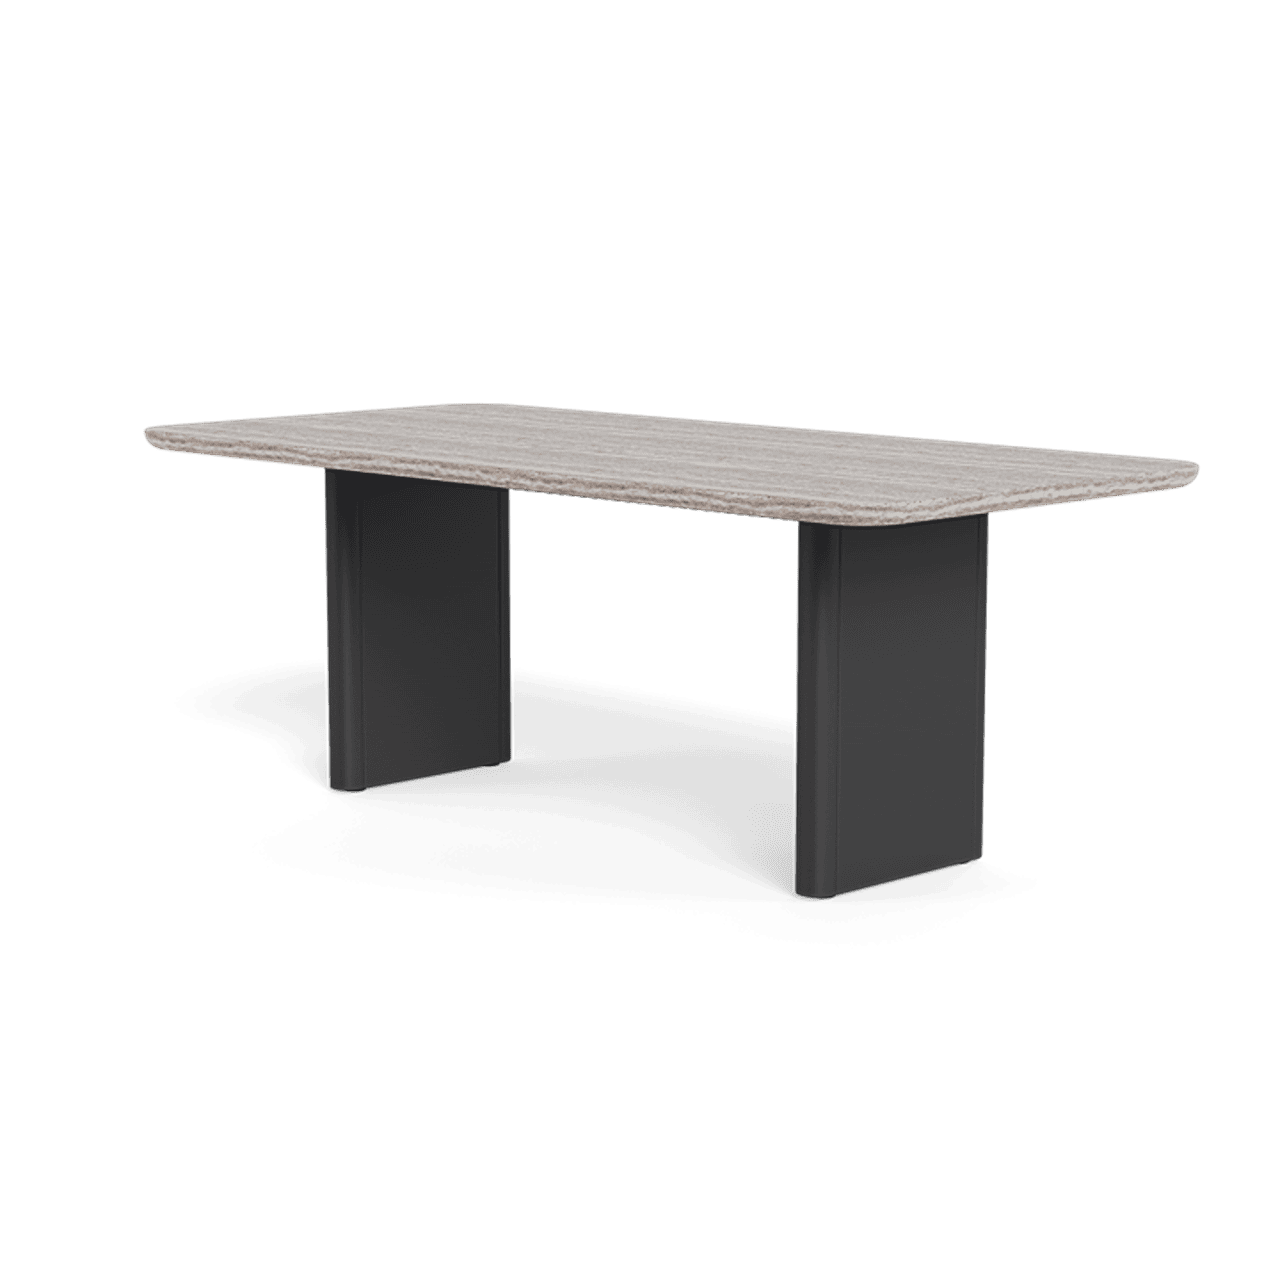 VICTORIA STONE DINING TABLE 81"-Aluminum Asteroid Frame